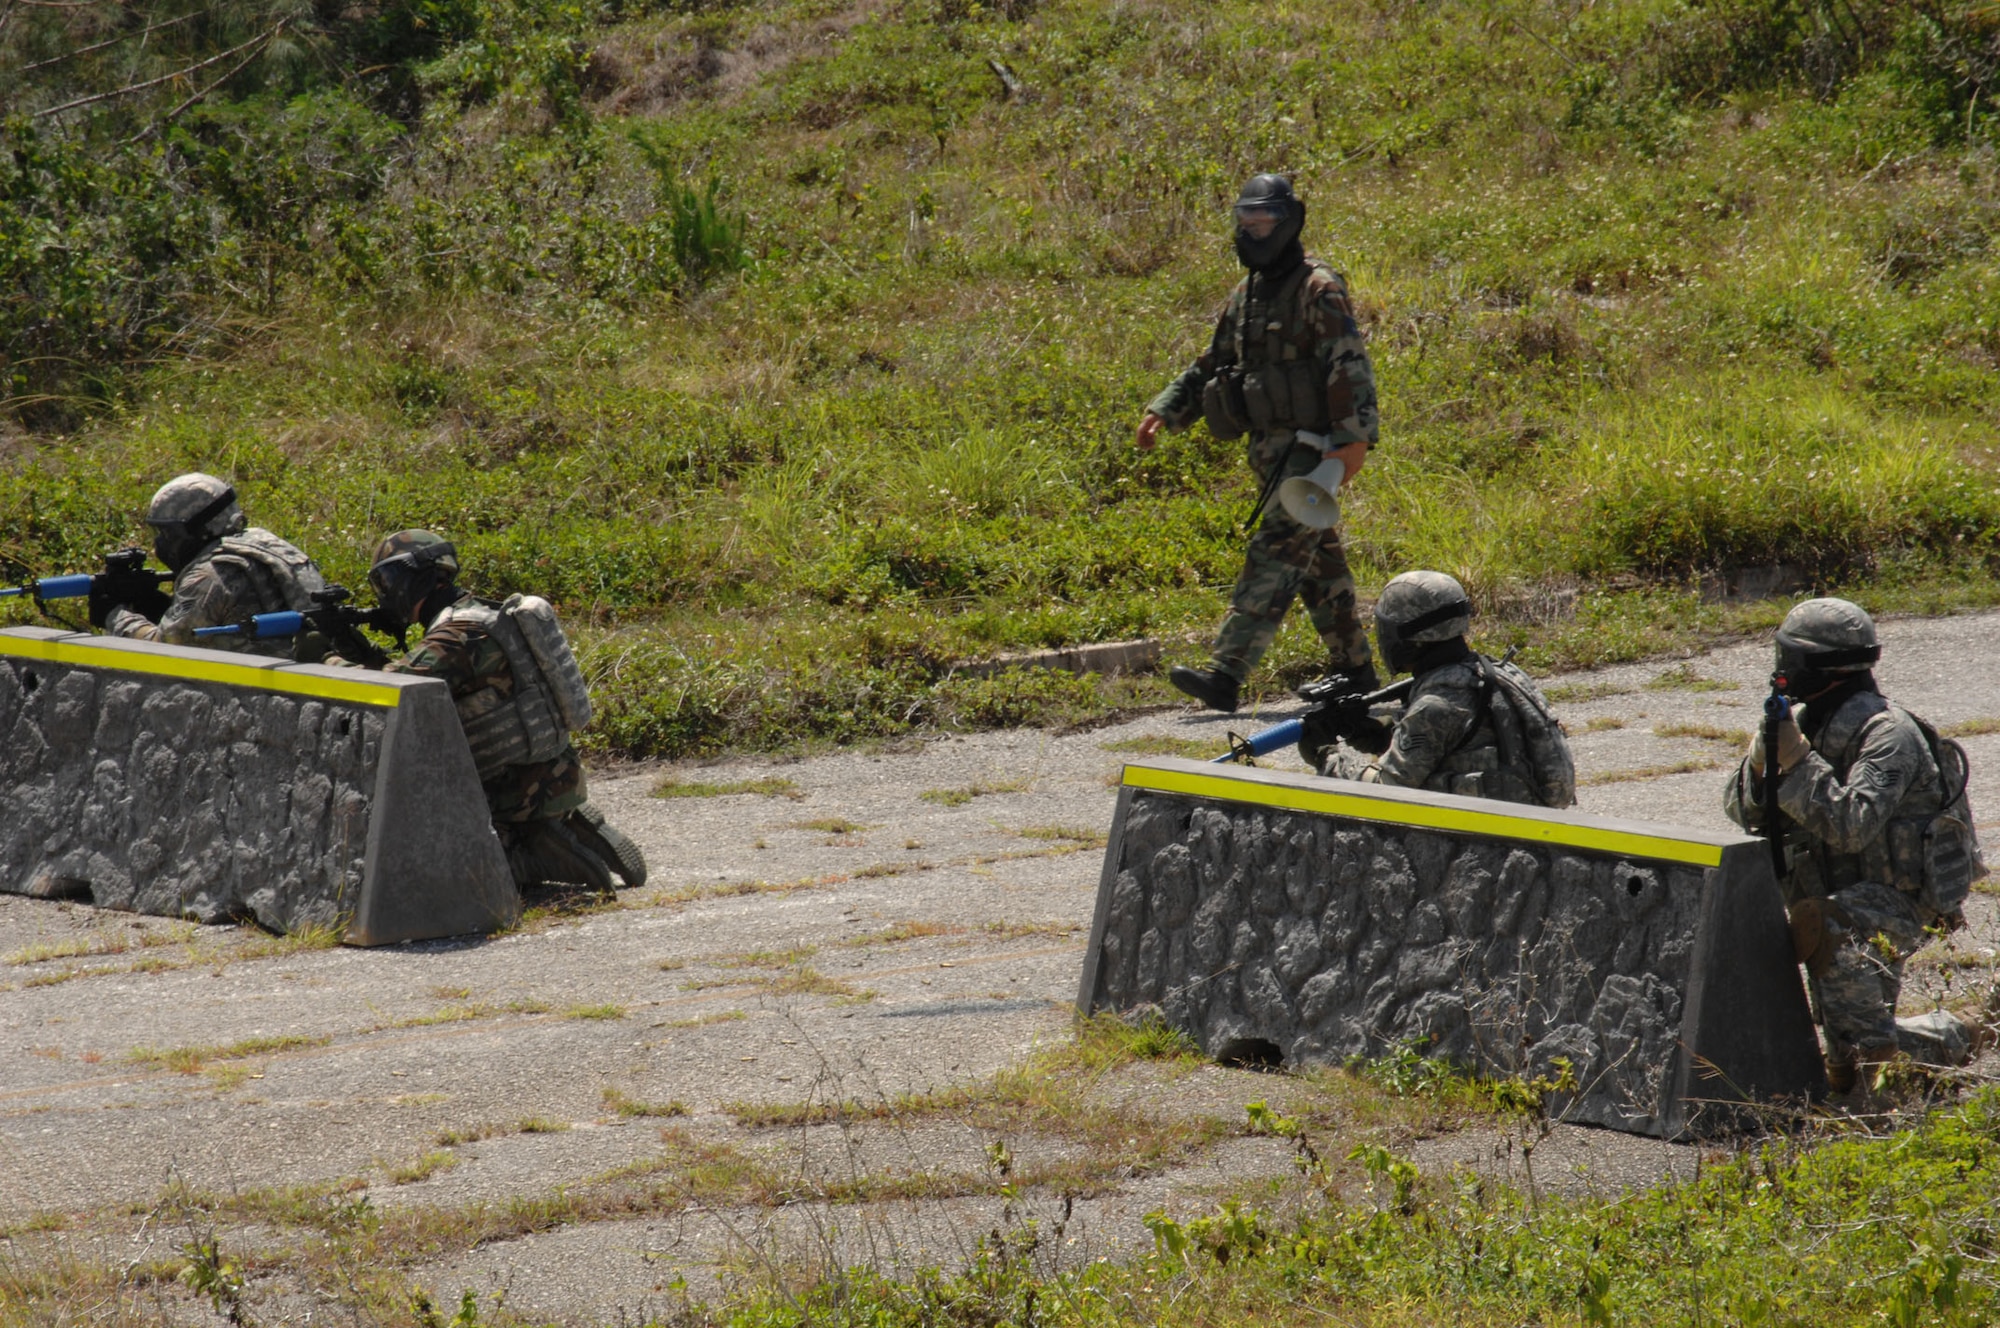 PACAF airmen participate in a Tactical Weapons, Simualtion during Commando Warrior on June 14 at Andy South here. Commando Warrior is a seven day pre-deployment training for PACAF's Security Forces airmen hosted by the 736th Security Forces Squadron, Andersen AFB, Guam. (U.S. Air Force photo by Airman 1st Class Nichelle Griffiths)